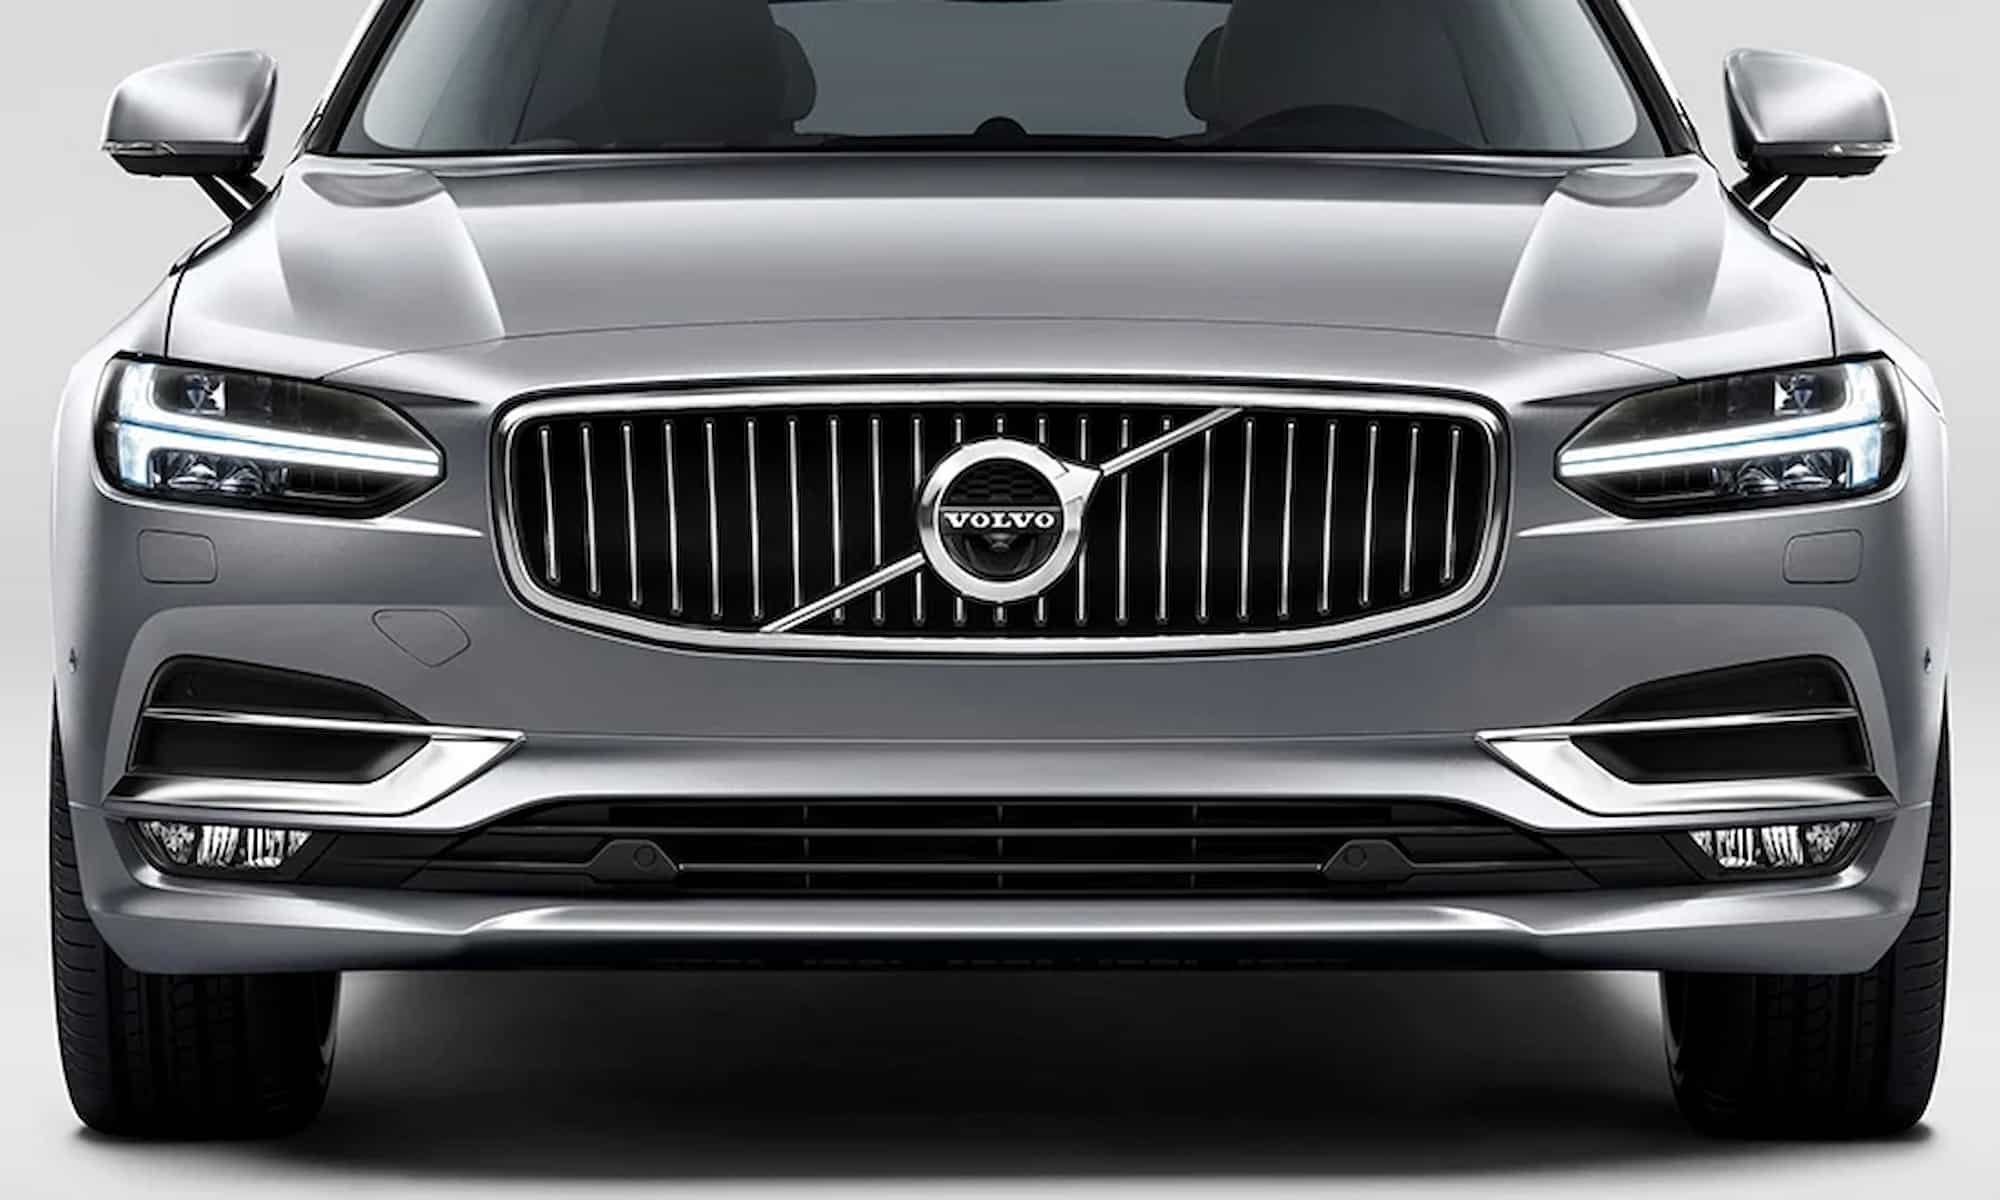 Volvo front grille